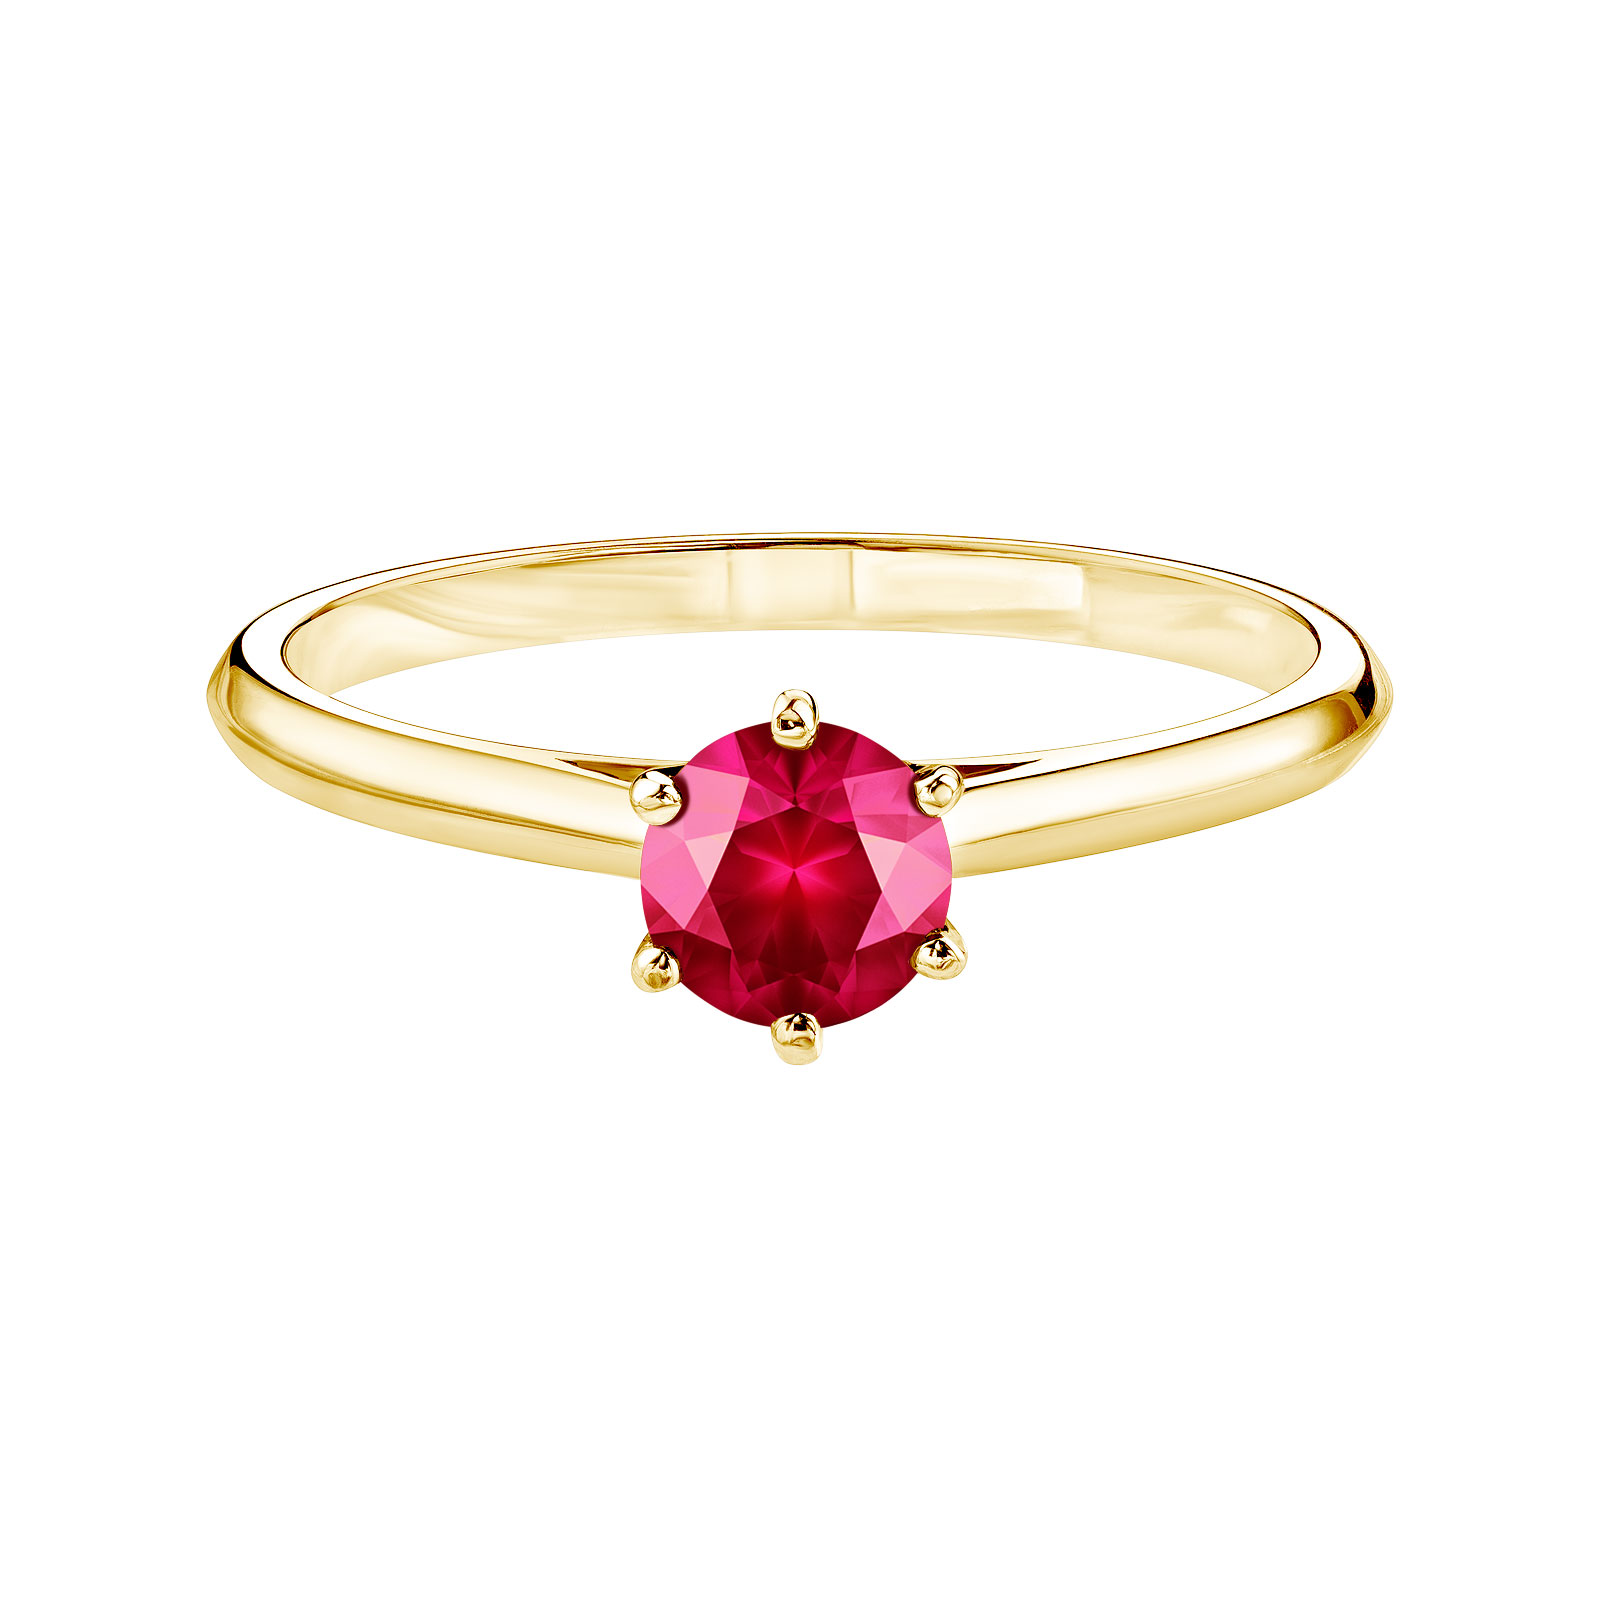 Bague Or jaune Rubis Little Lady 1